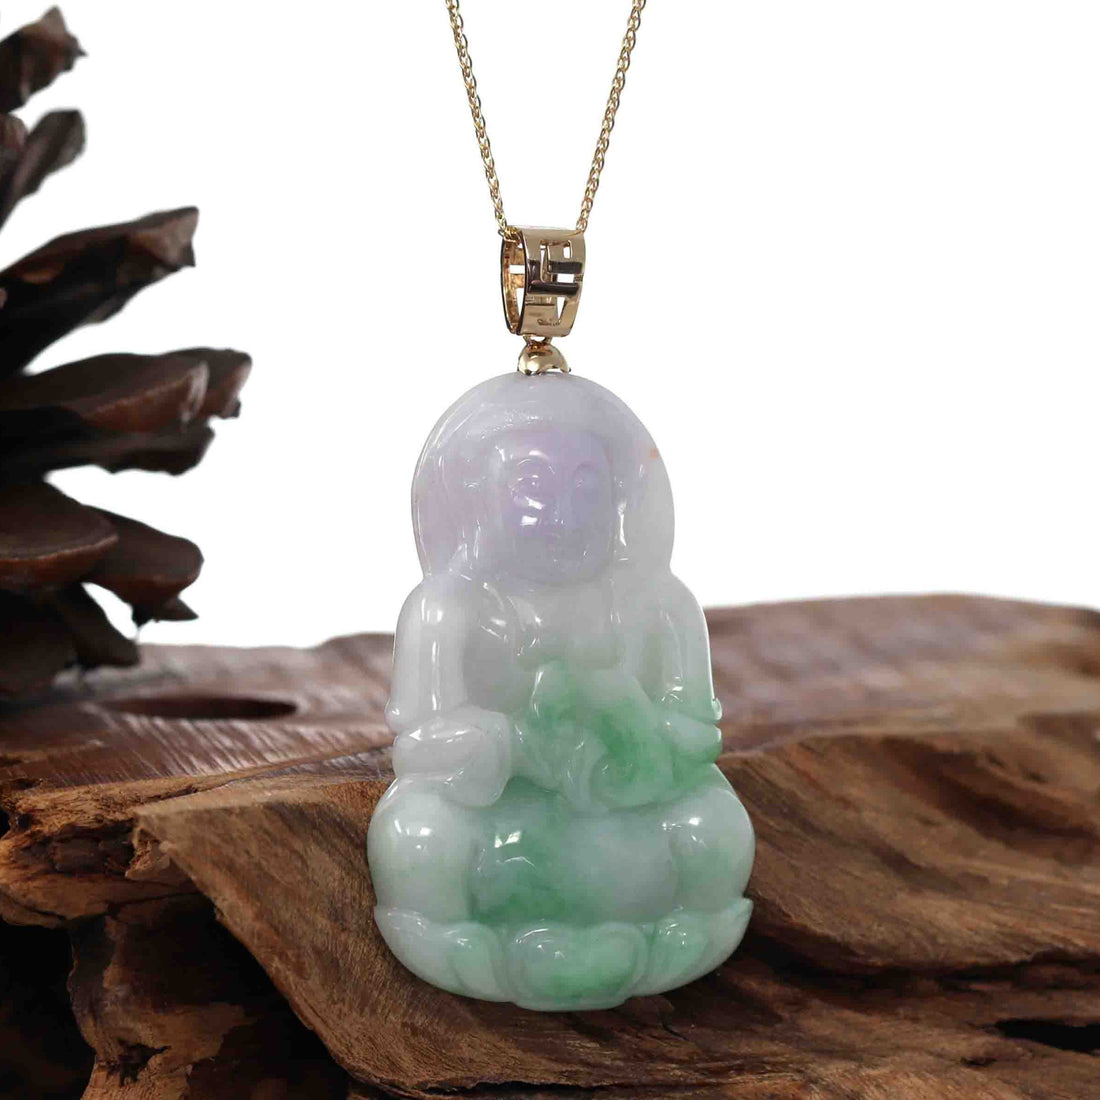 Baikalla Jewelry Jade Guanyin Pendant Necklace "Goddess of Compassion" 14k Yellow Gold Genuine Burmese Jadeite Jade Guanyin Necklace With Good Luck Design